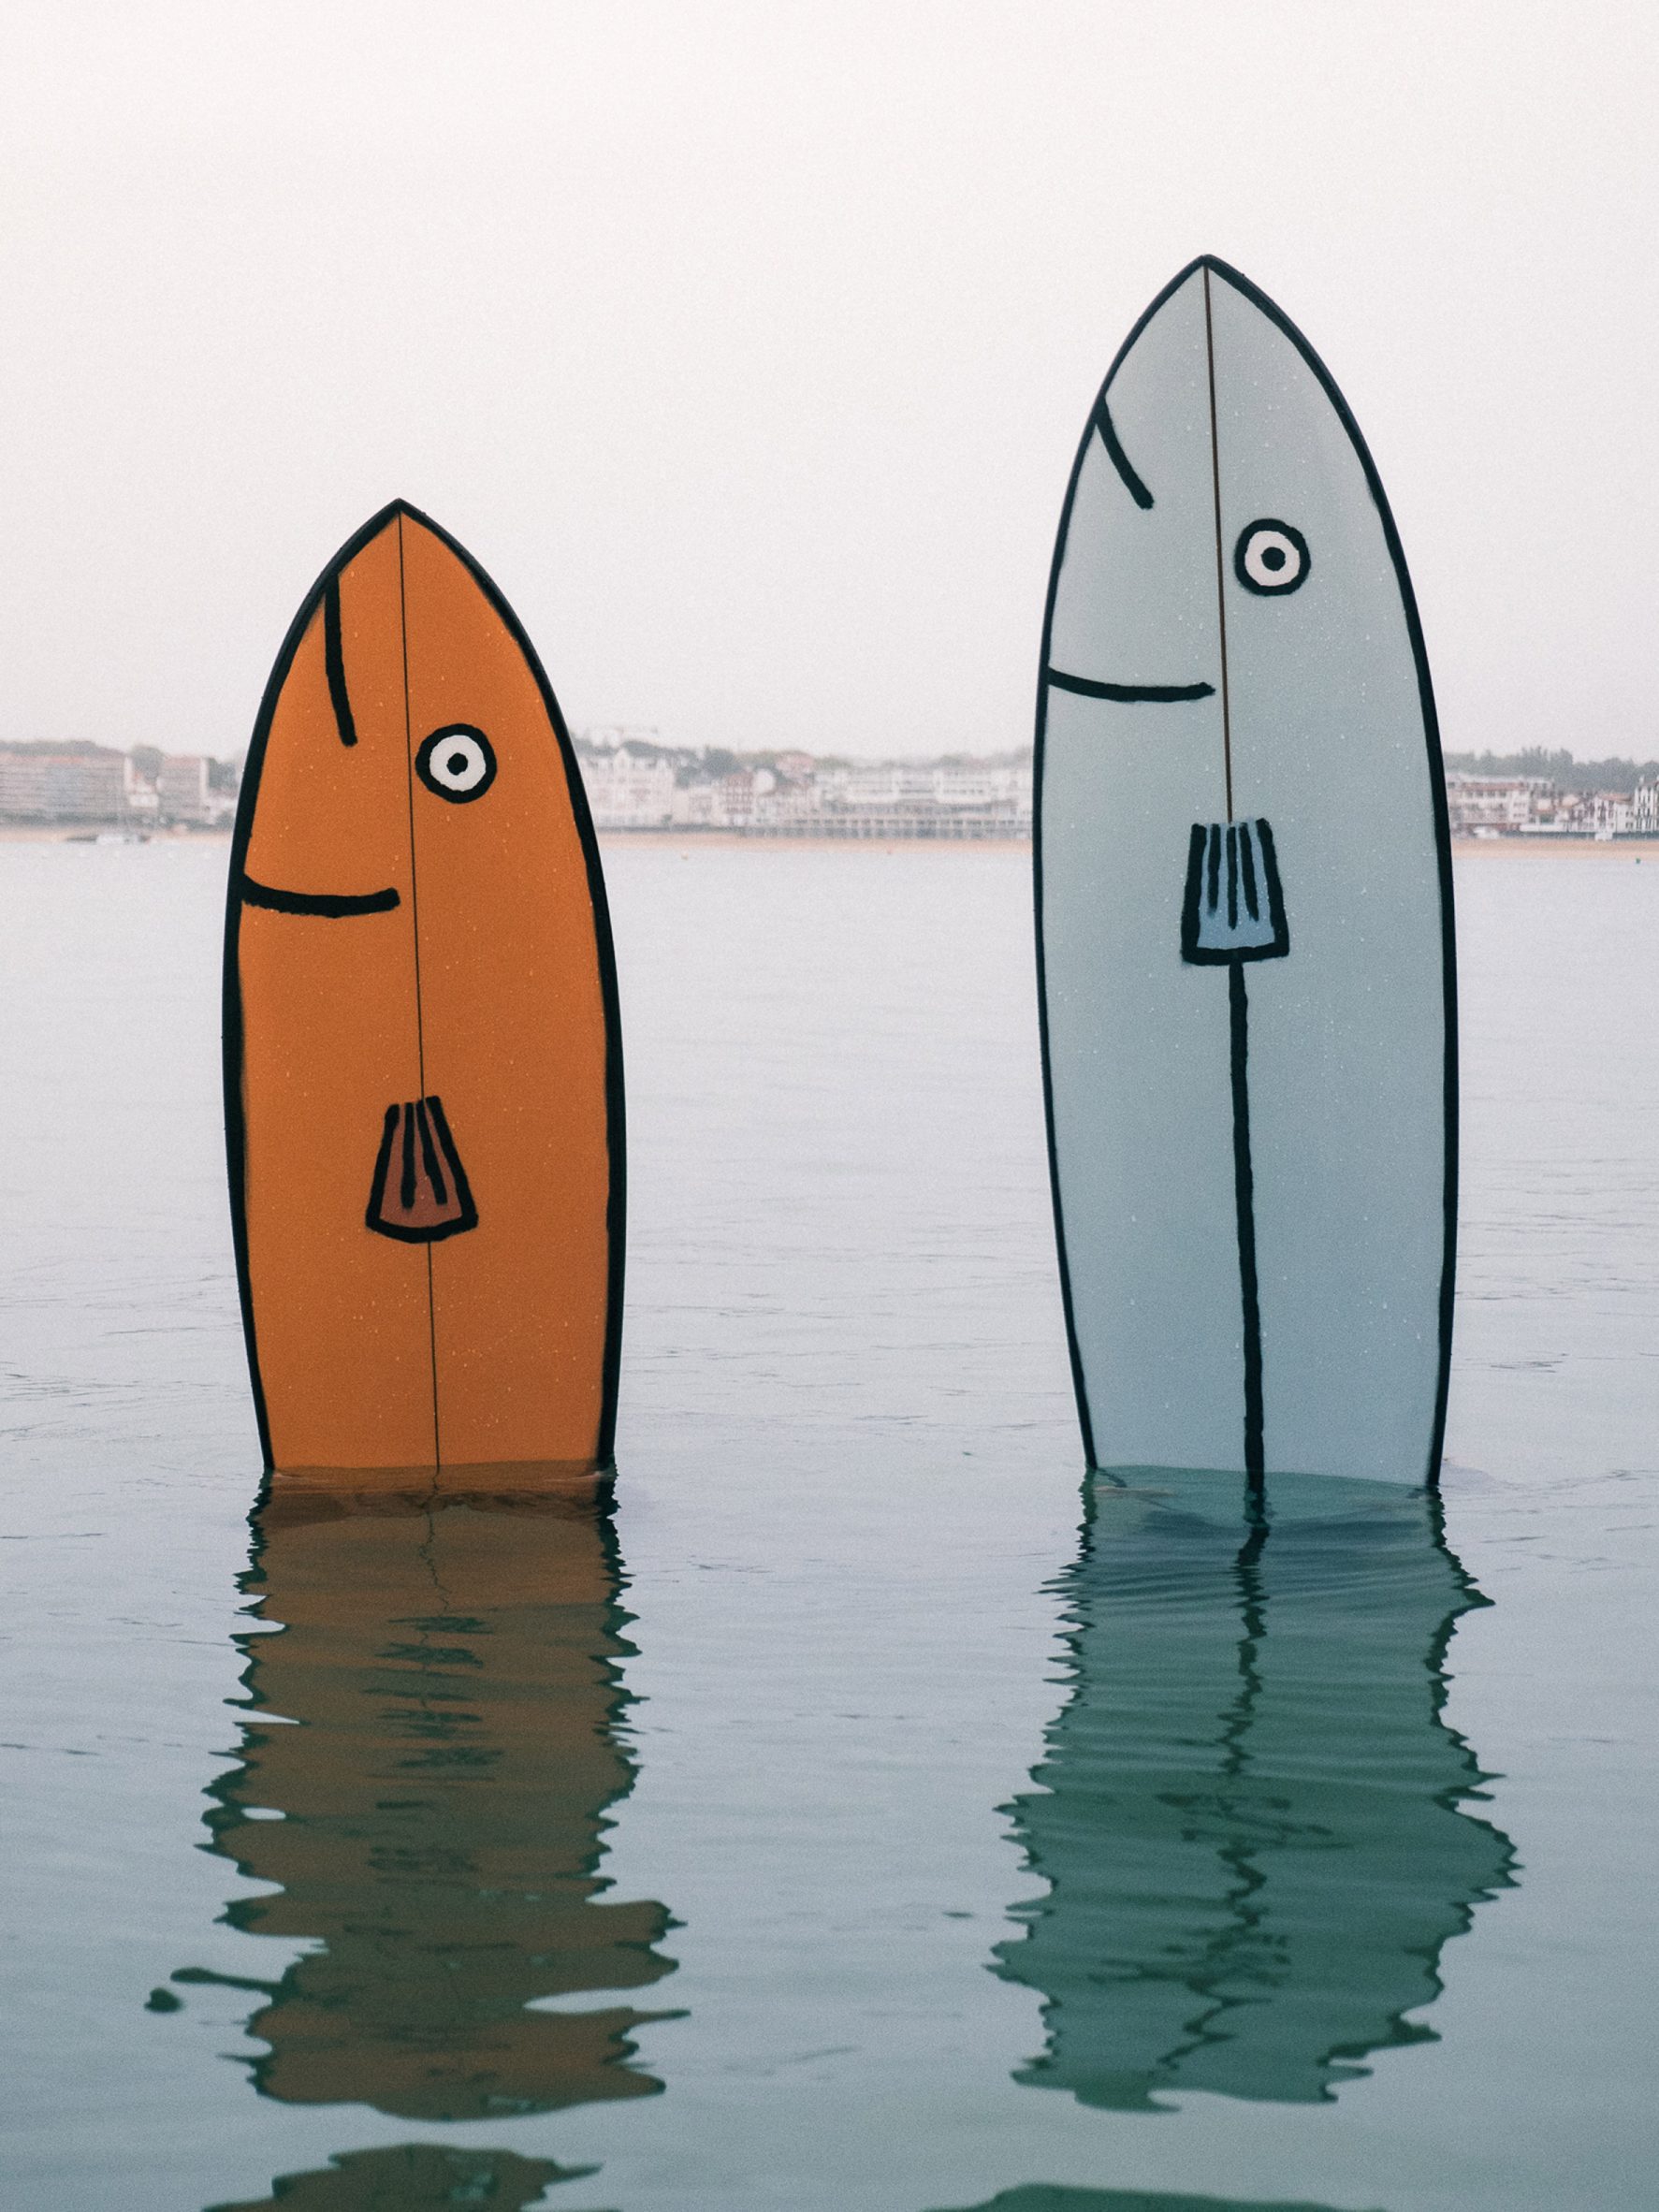 really cool surfboards